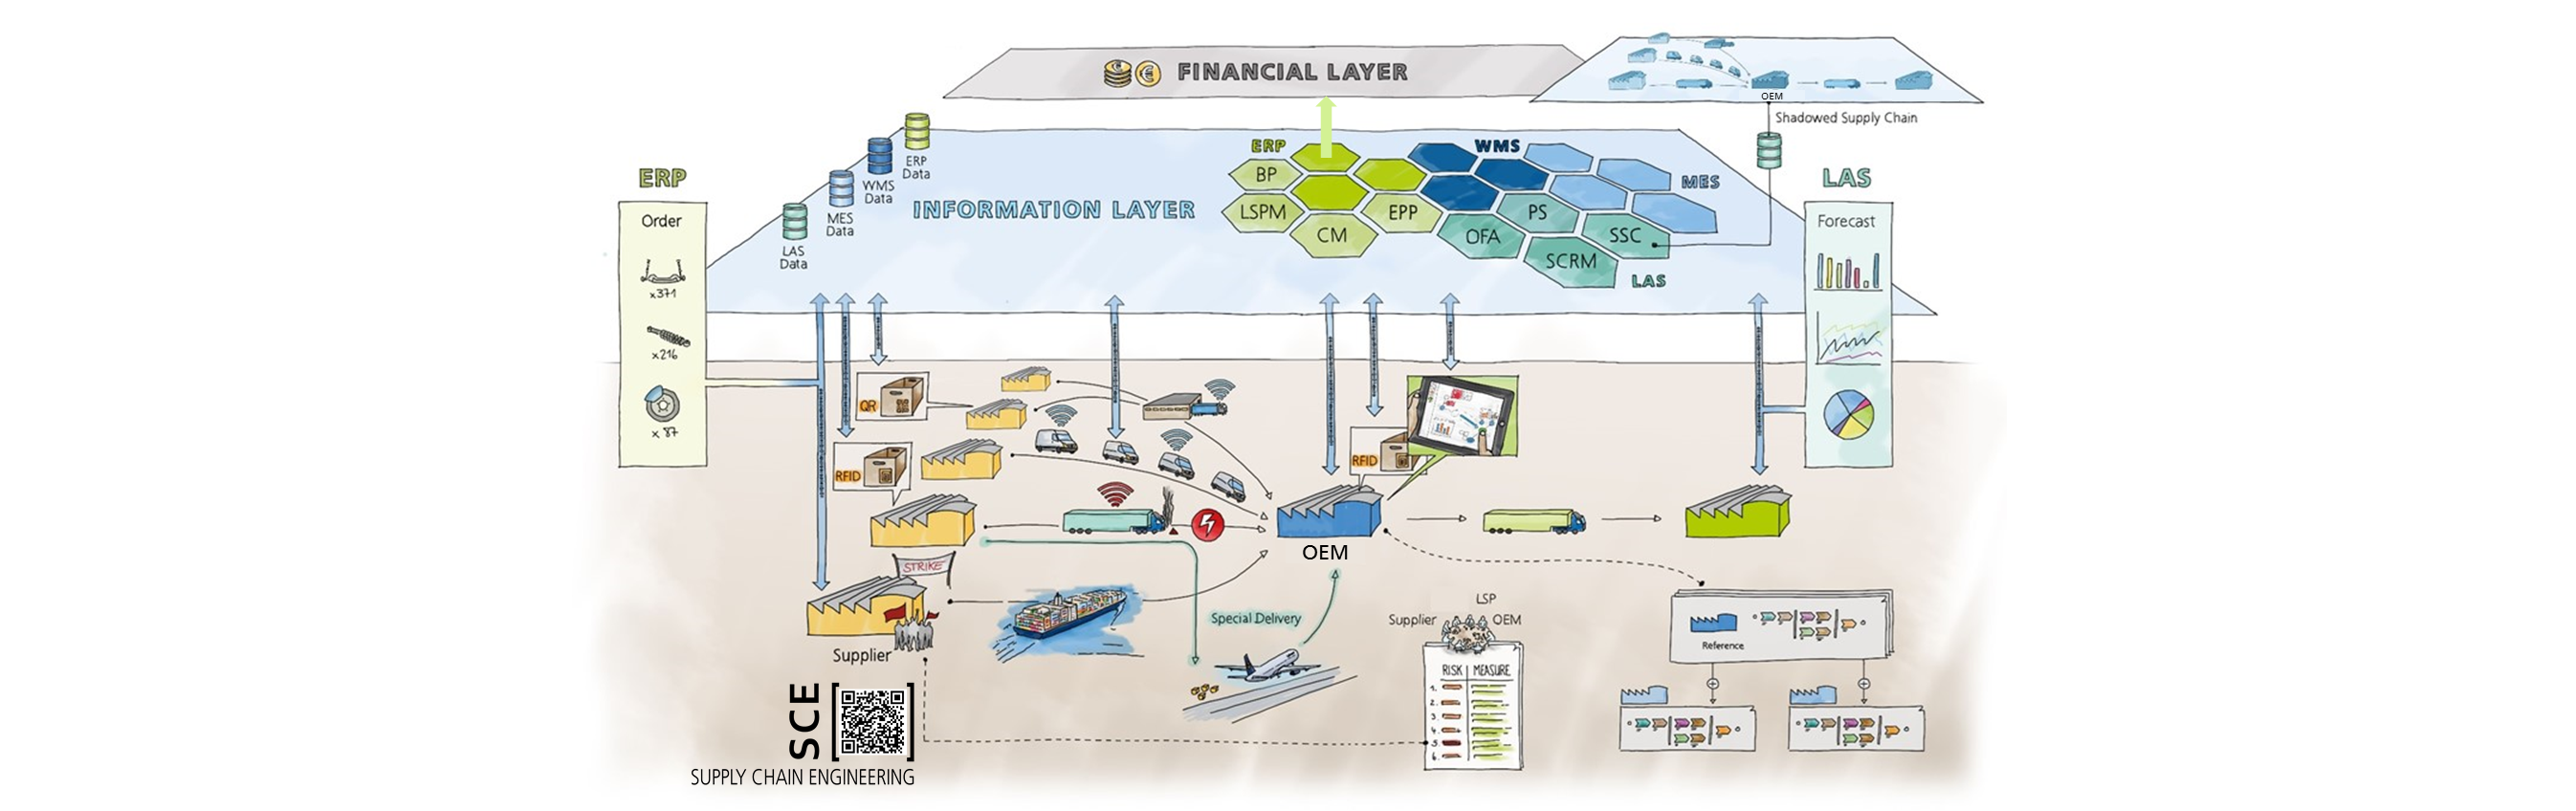 Information graphic about the connections between ERP, MES, LAS in the supply chain system 